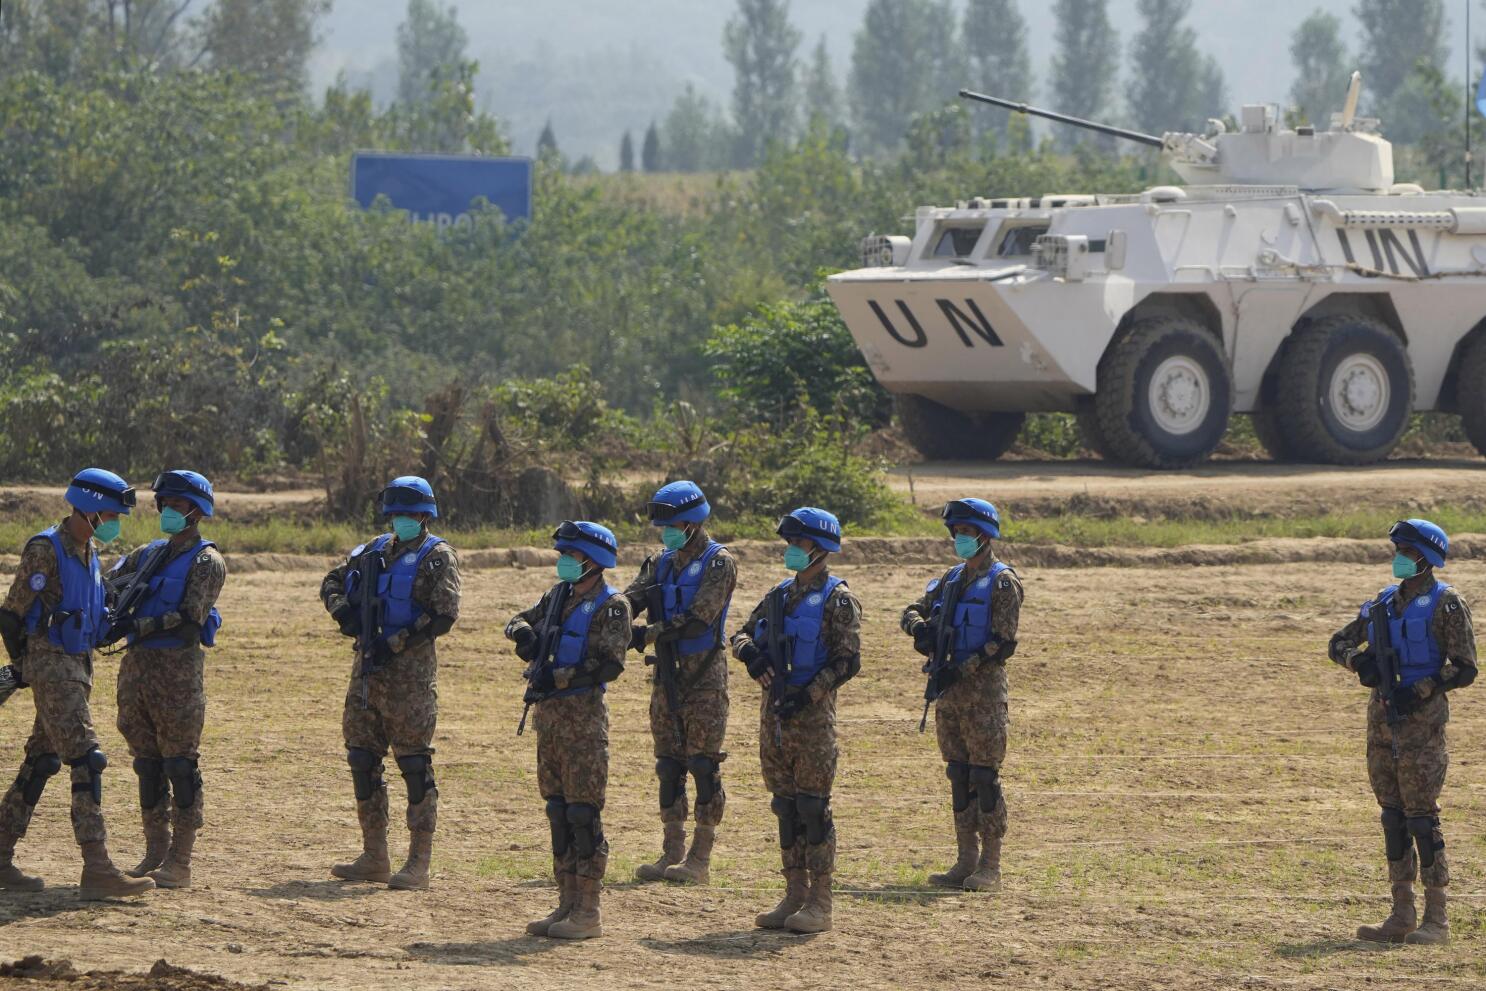 China affirms UN peacekeeping role with multinational drills